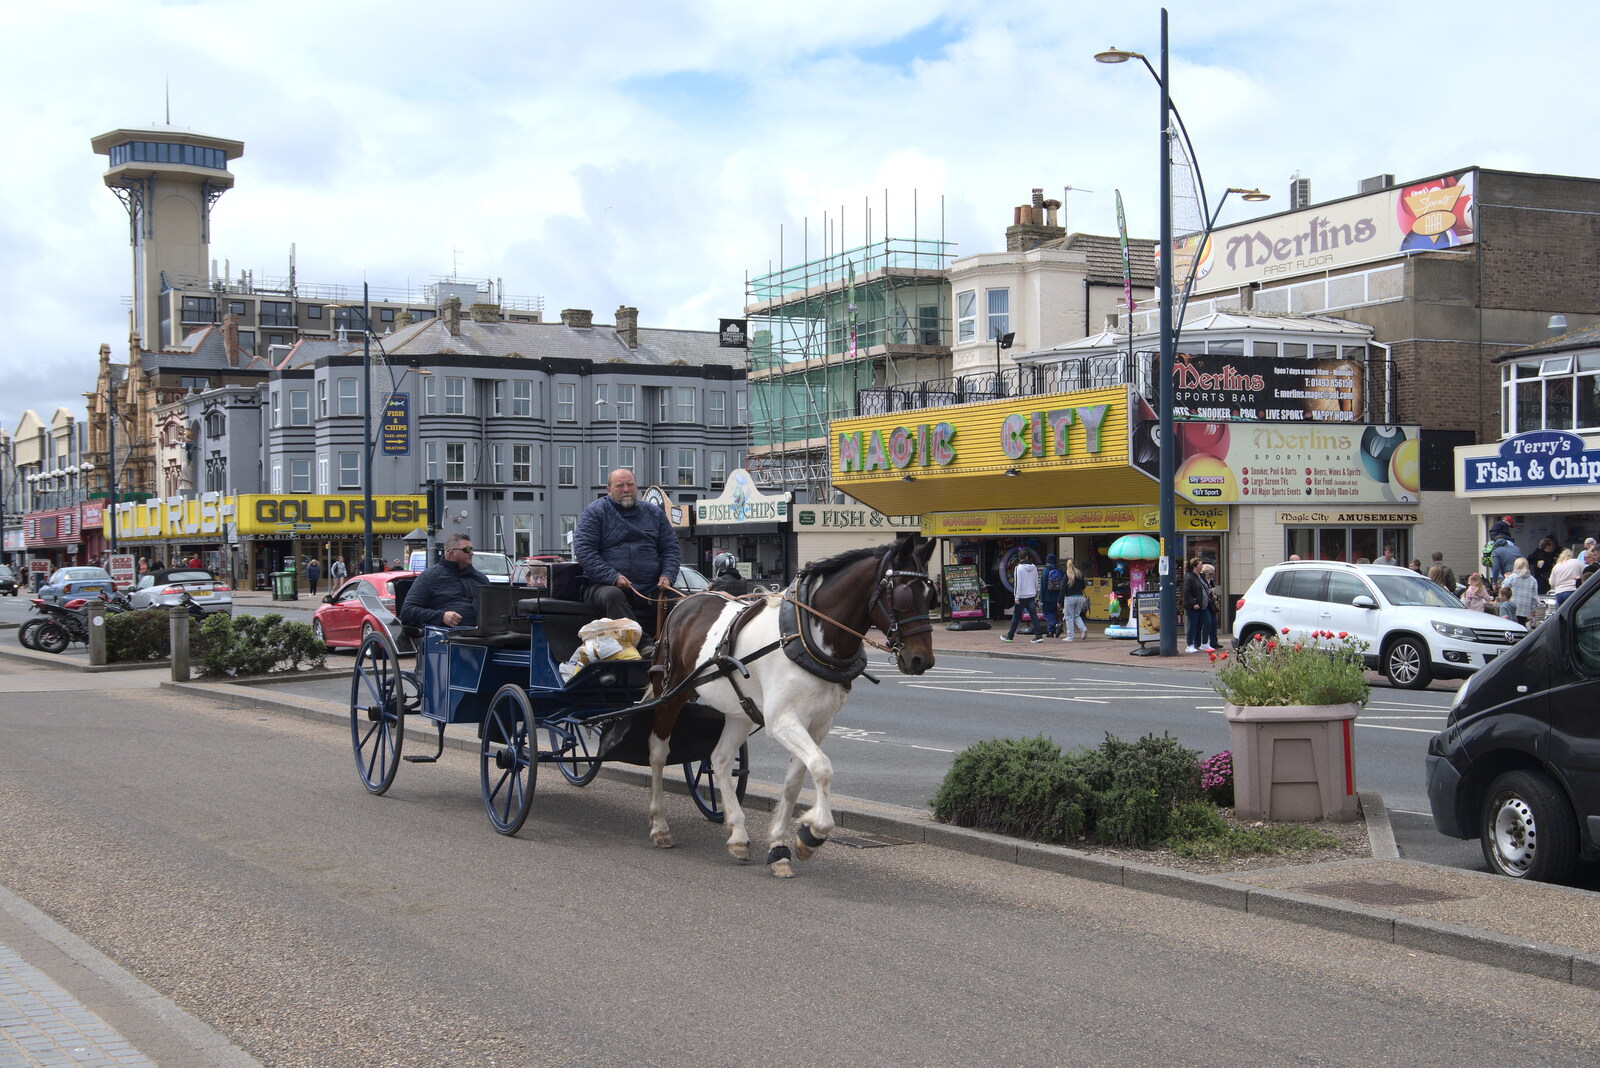 A horse and cart from Faded Seaside Glamour: A Weekend in Great Yarmouth, Norfolk - 29th May 2022